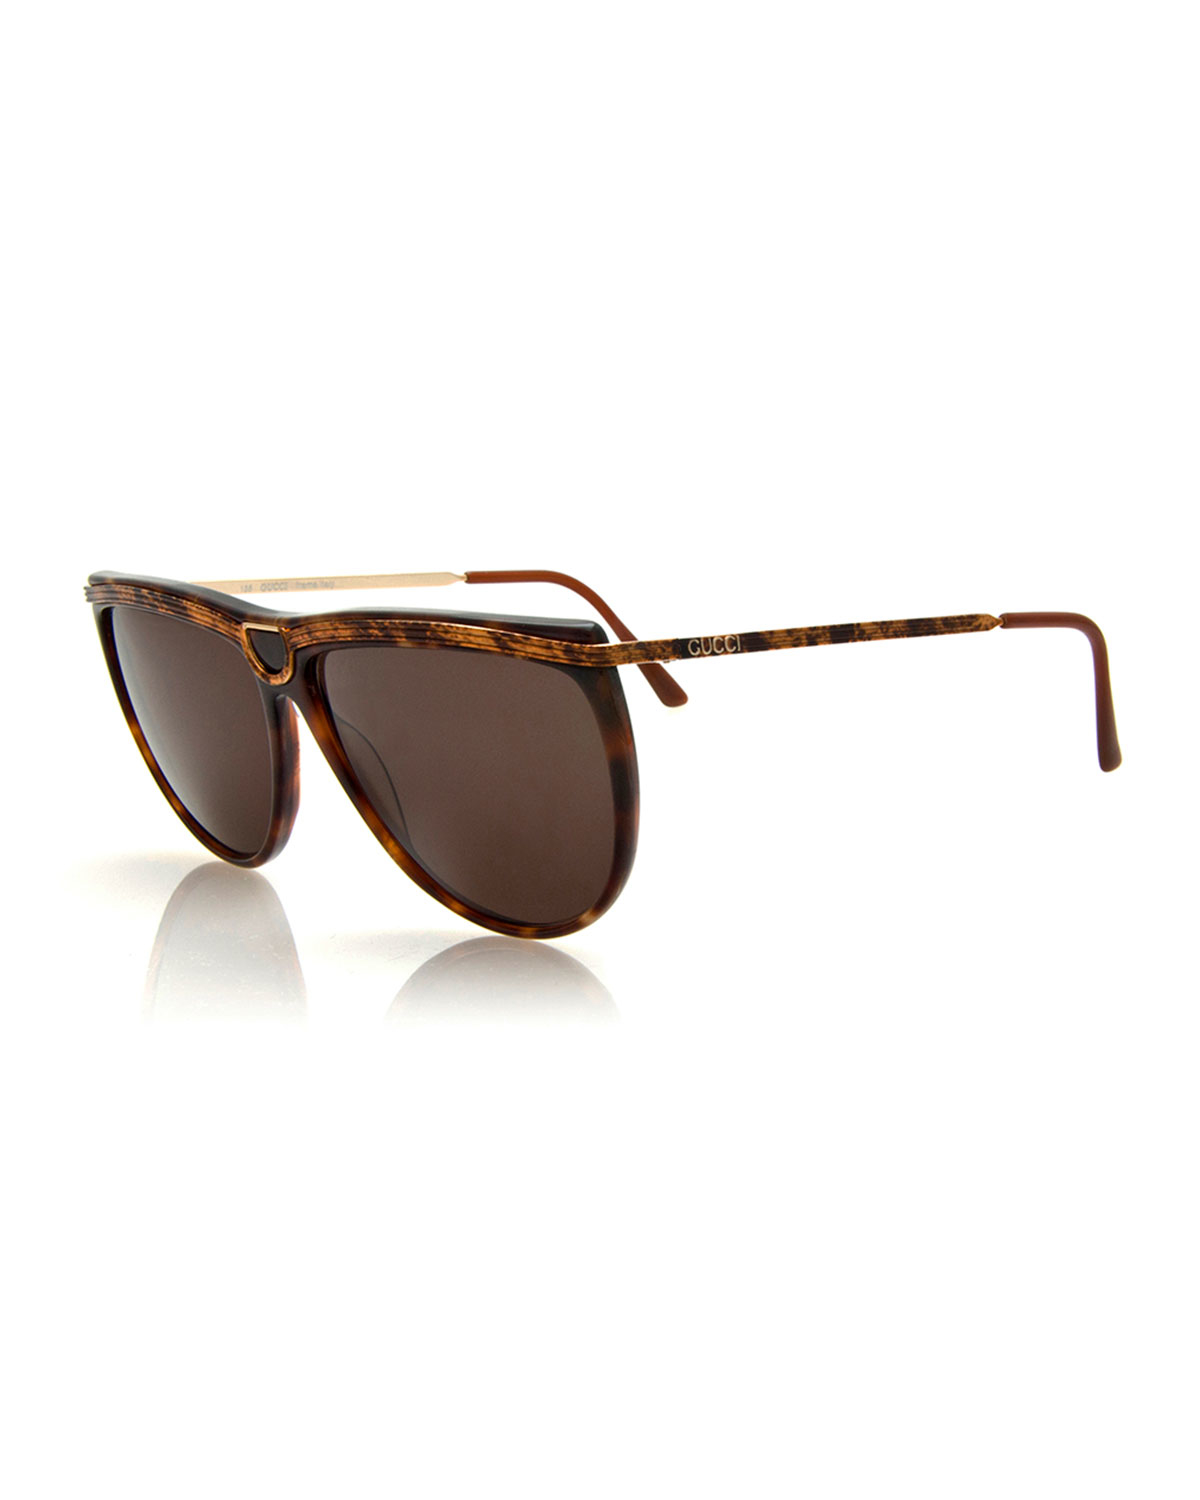 Gucci Vintage Sunglasses W/center Detail in Brown | Lyst